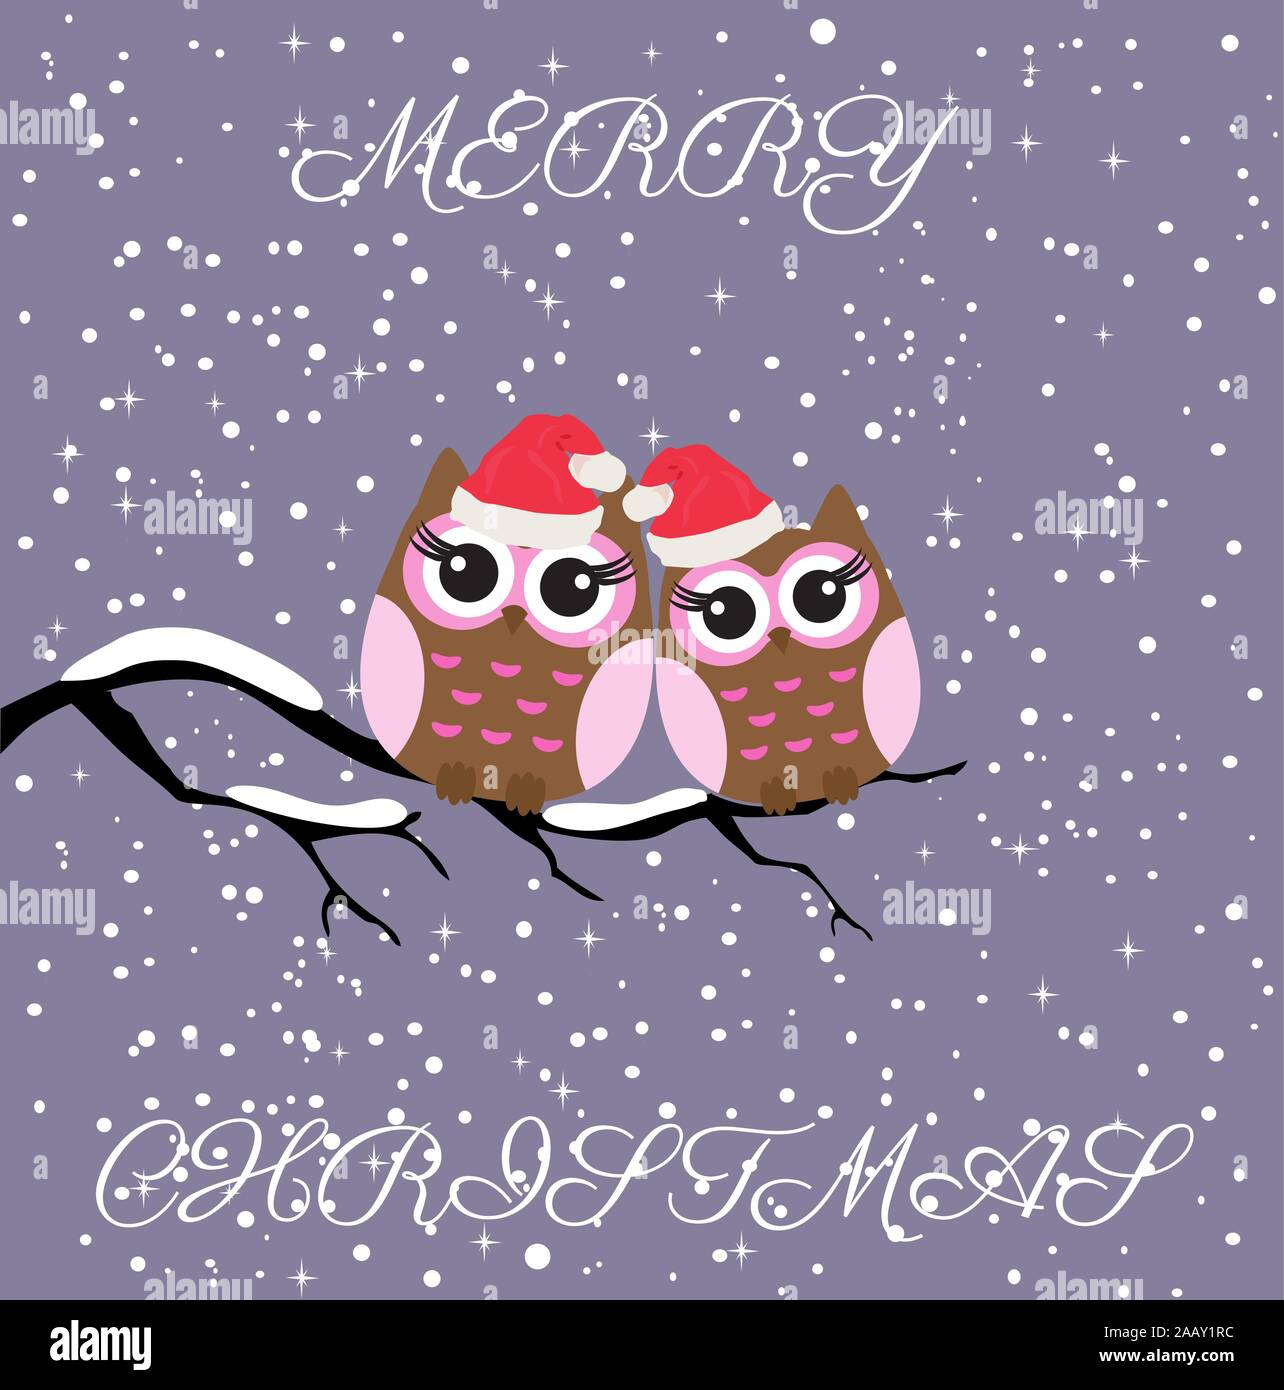 Vector Illustration Of Christmas Background With Owls In Santa